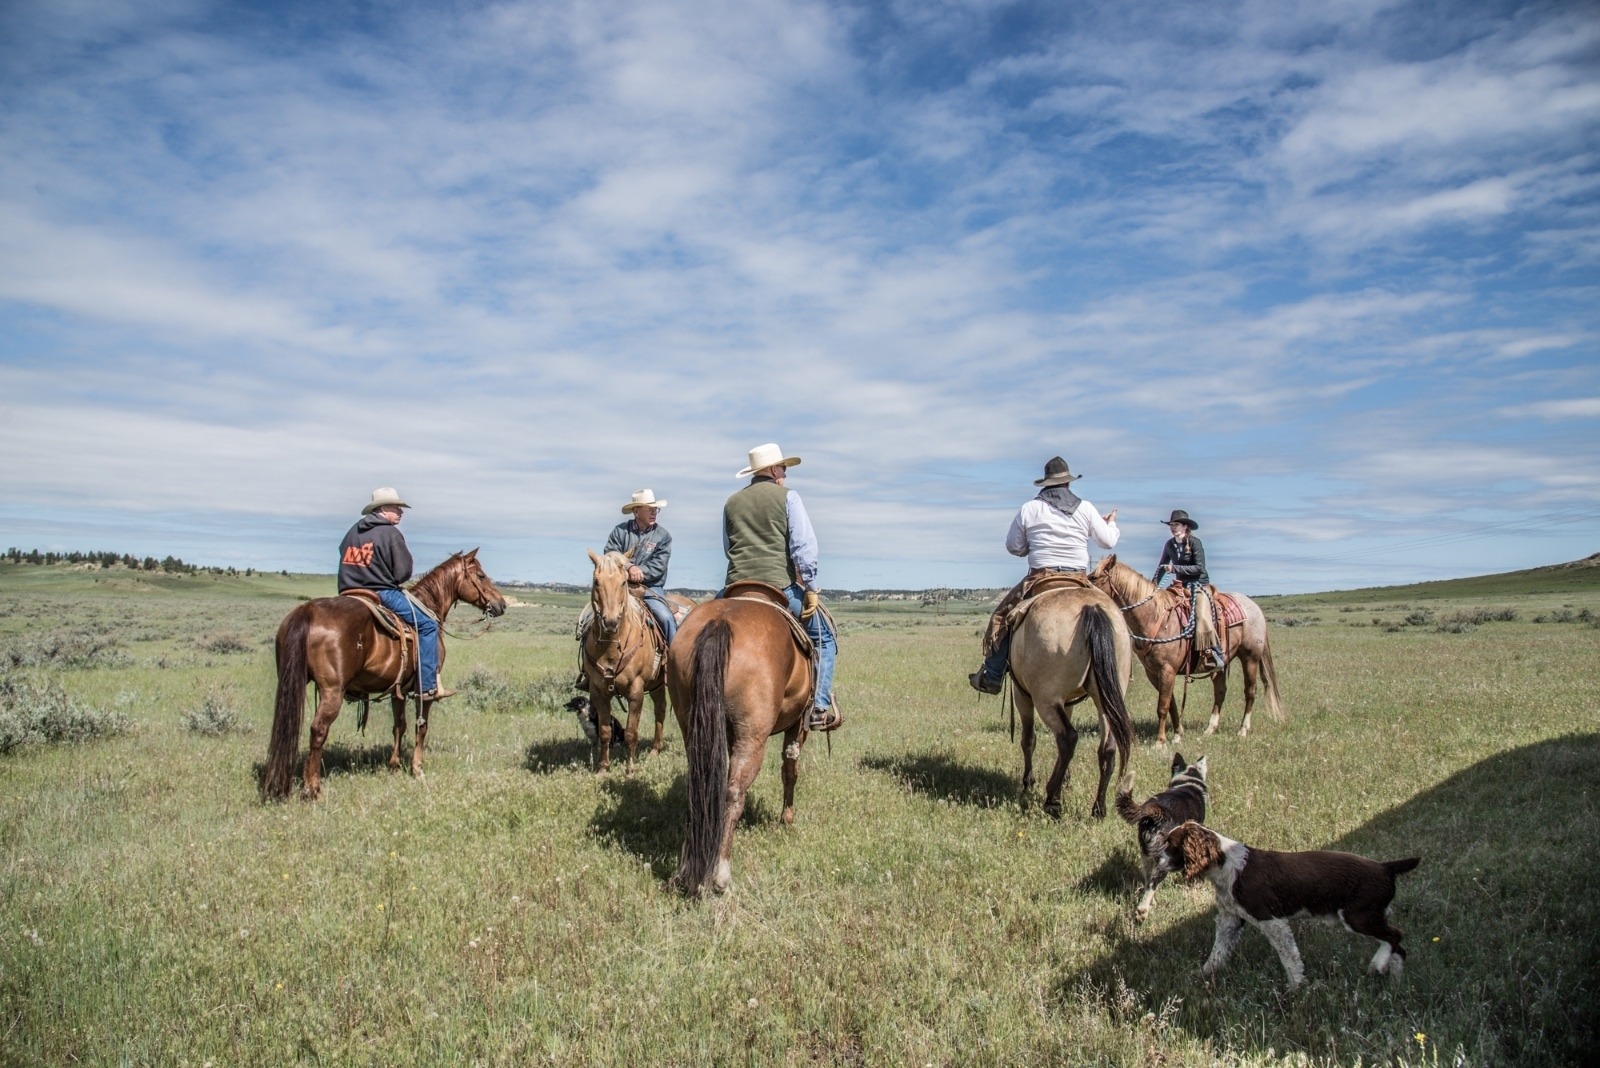 Cowboys set off to check their livestock on the high rolling plains. They do it for real. Photo by Alexis Bonogofsky